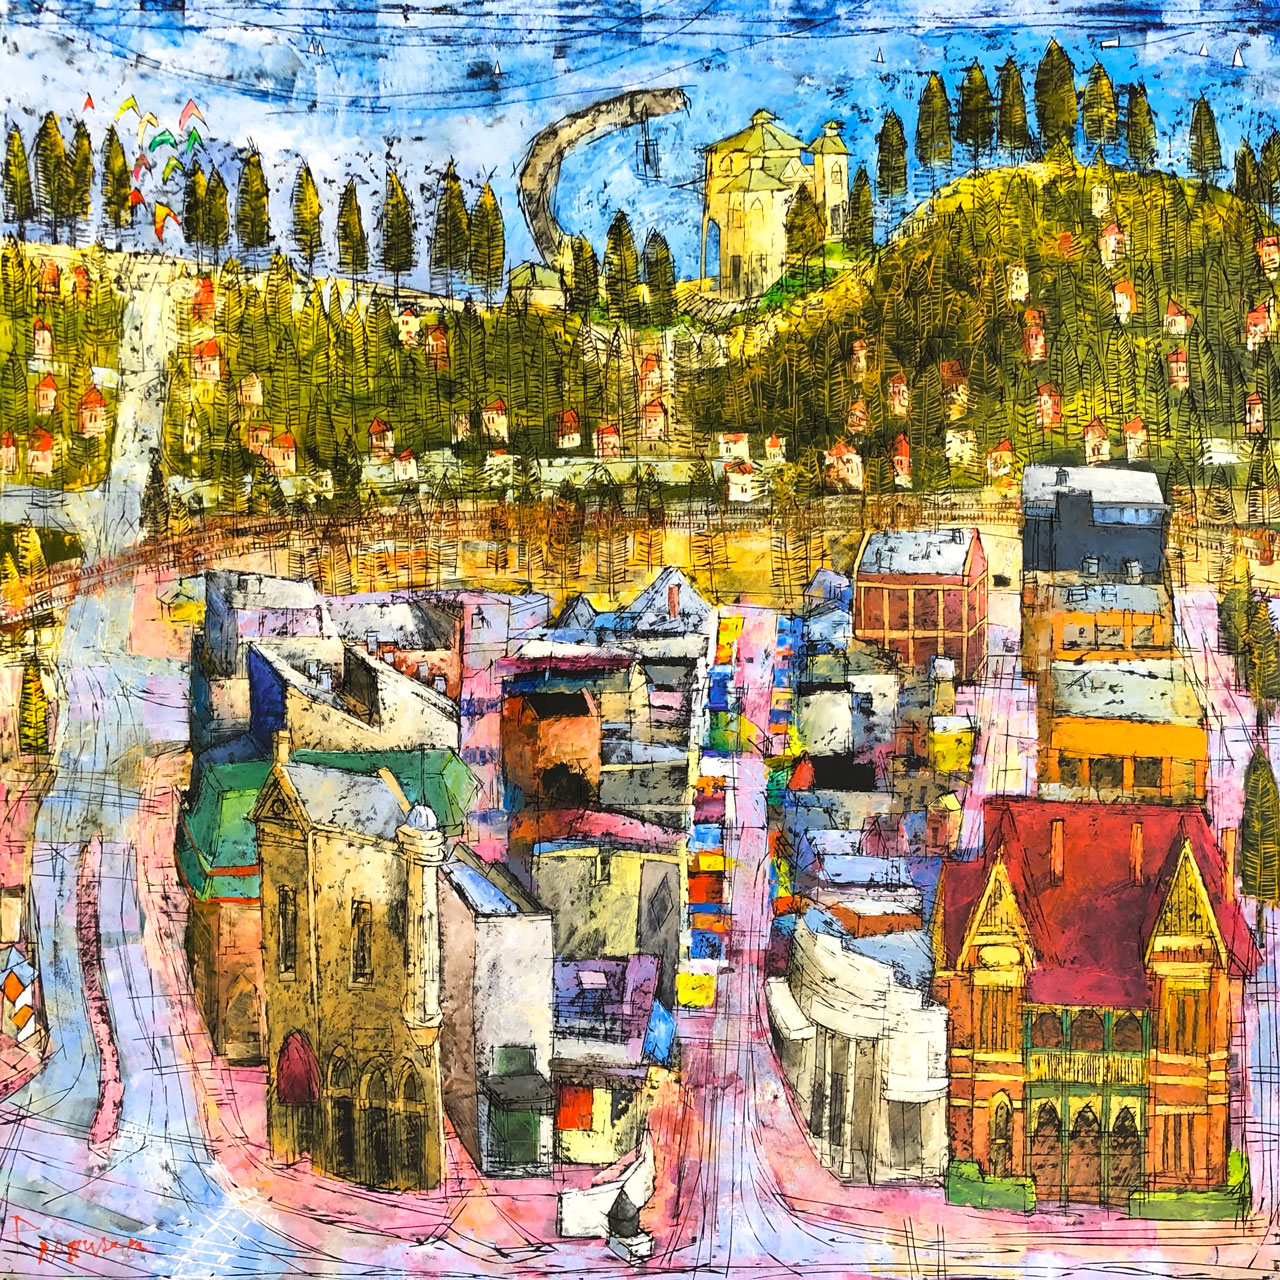 Village By The Sea, painting by Ken Rasmussen